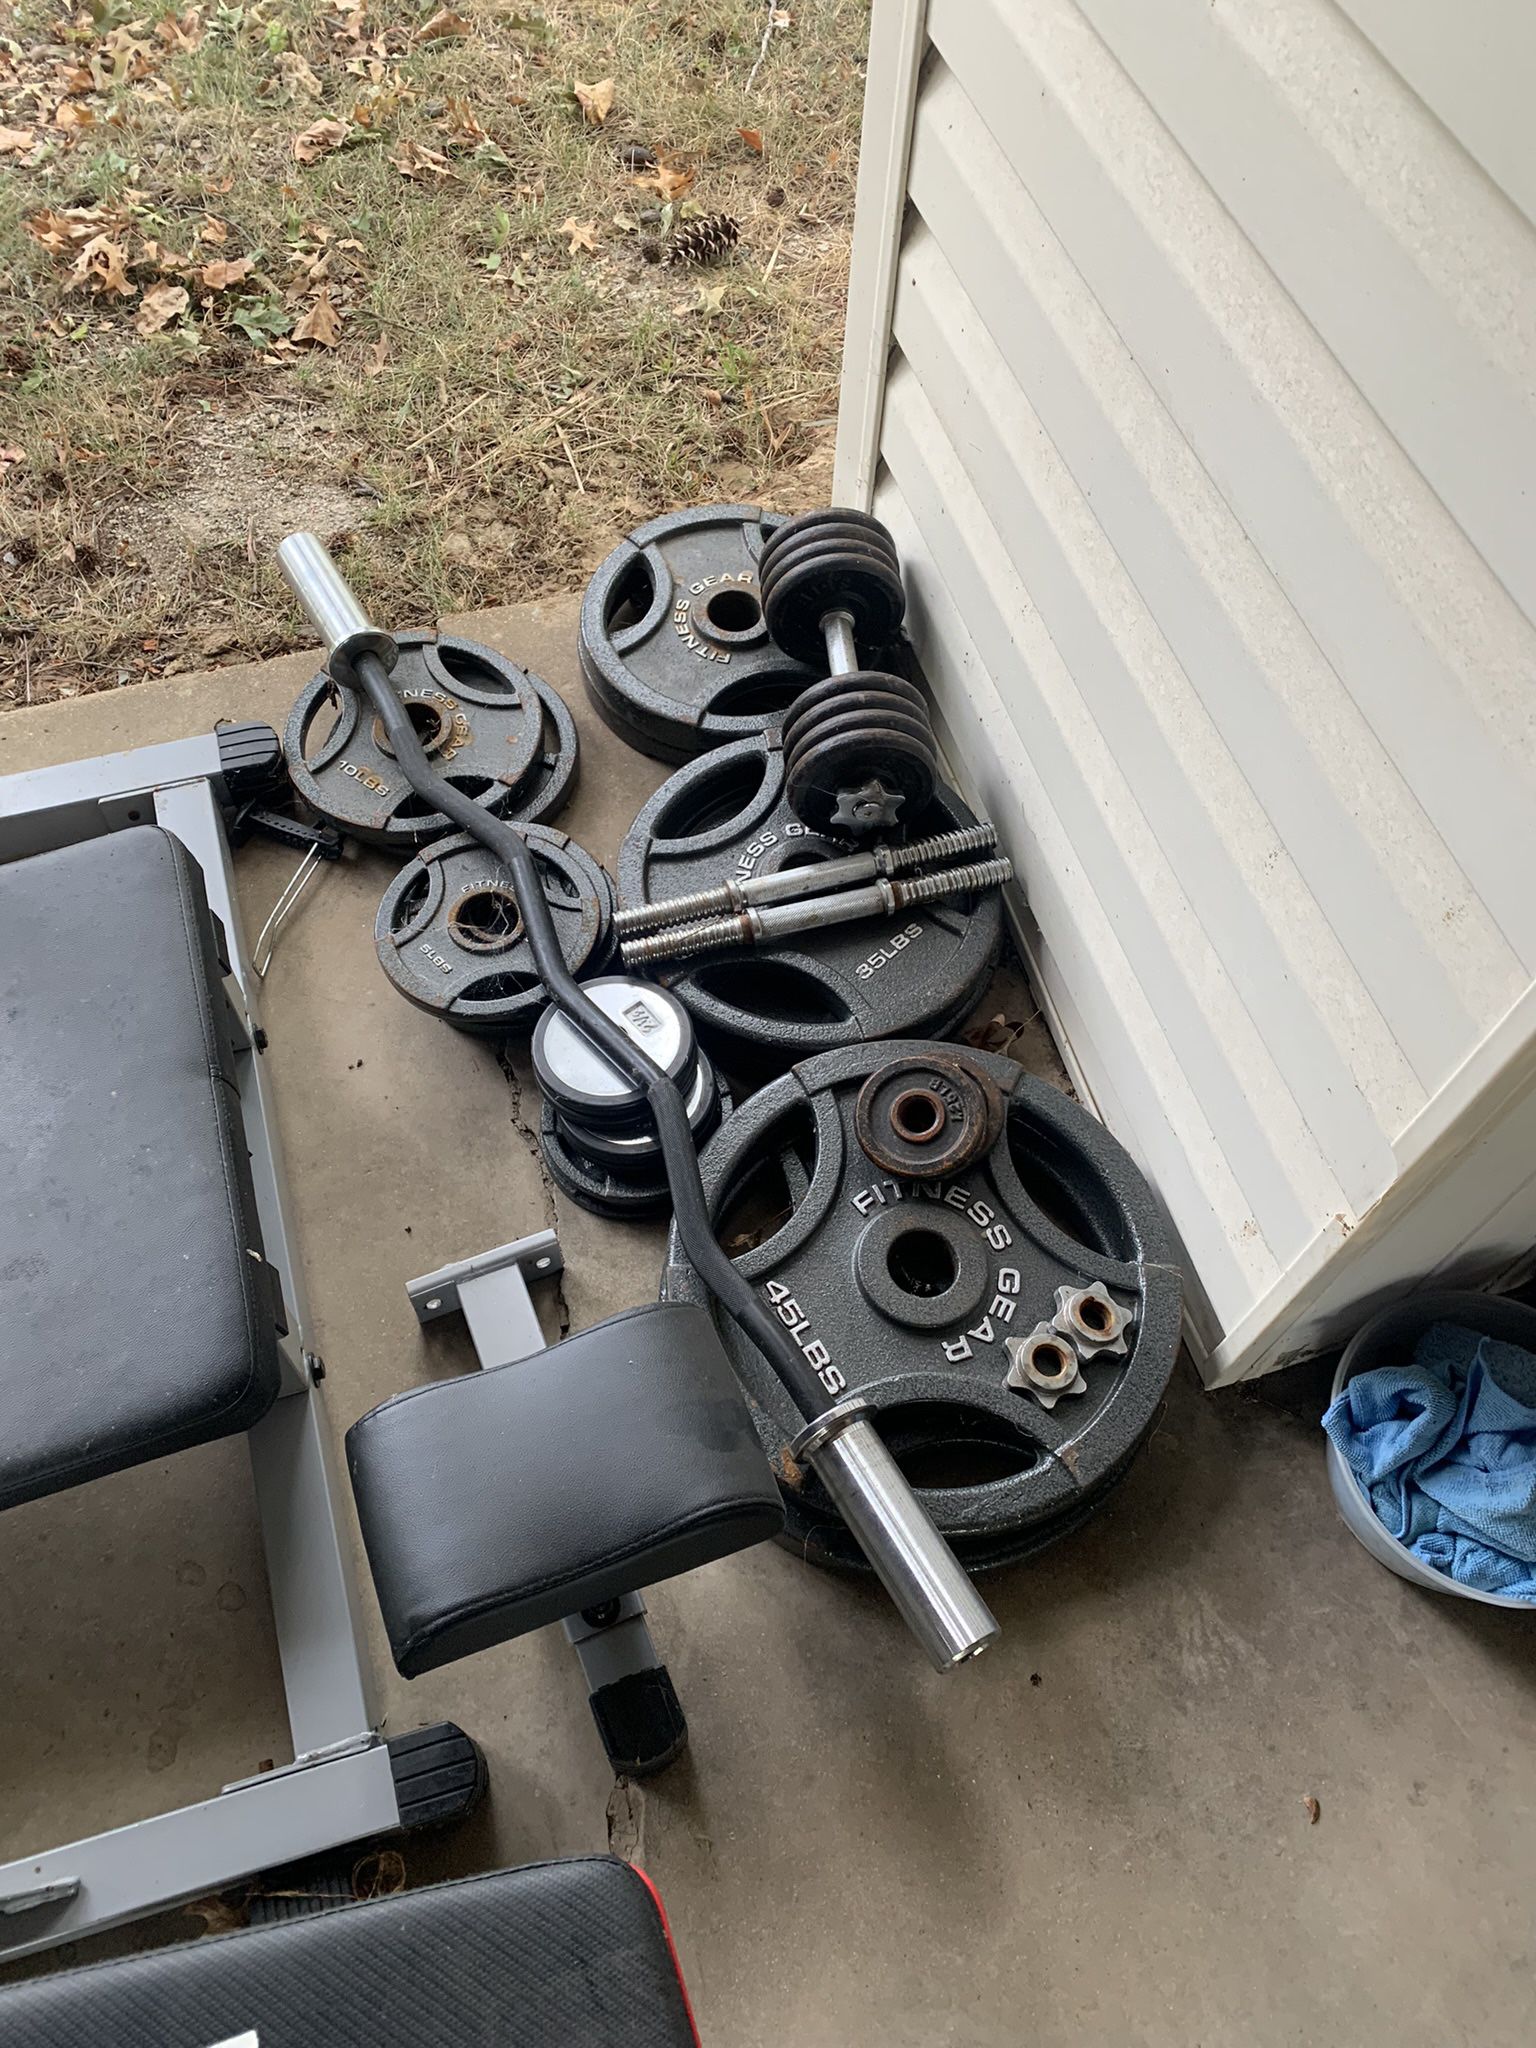 Weight Set And Bench For Sale